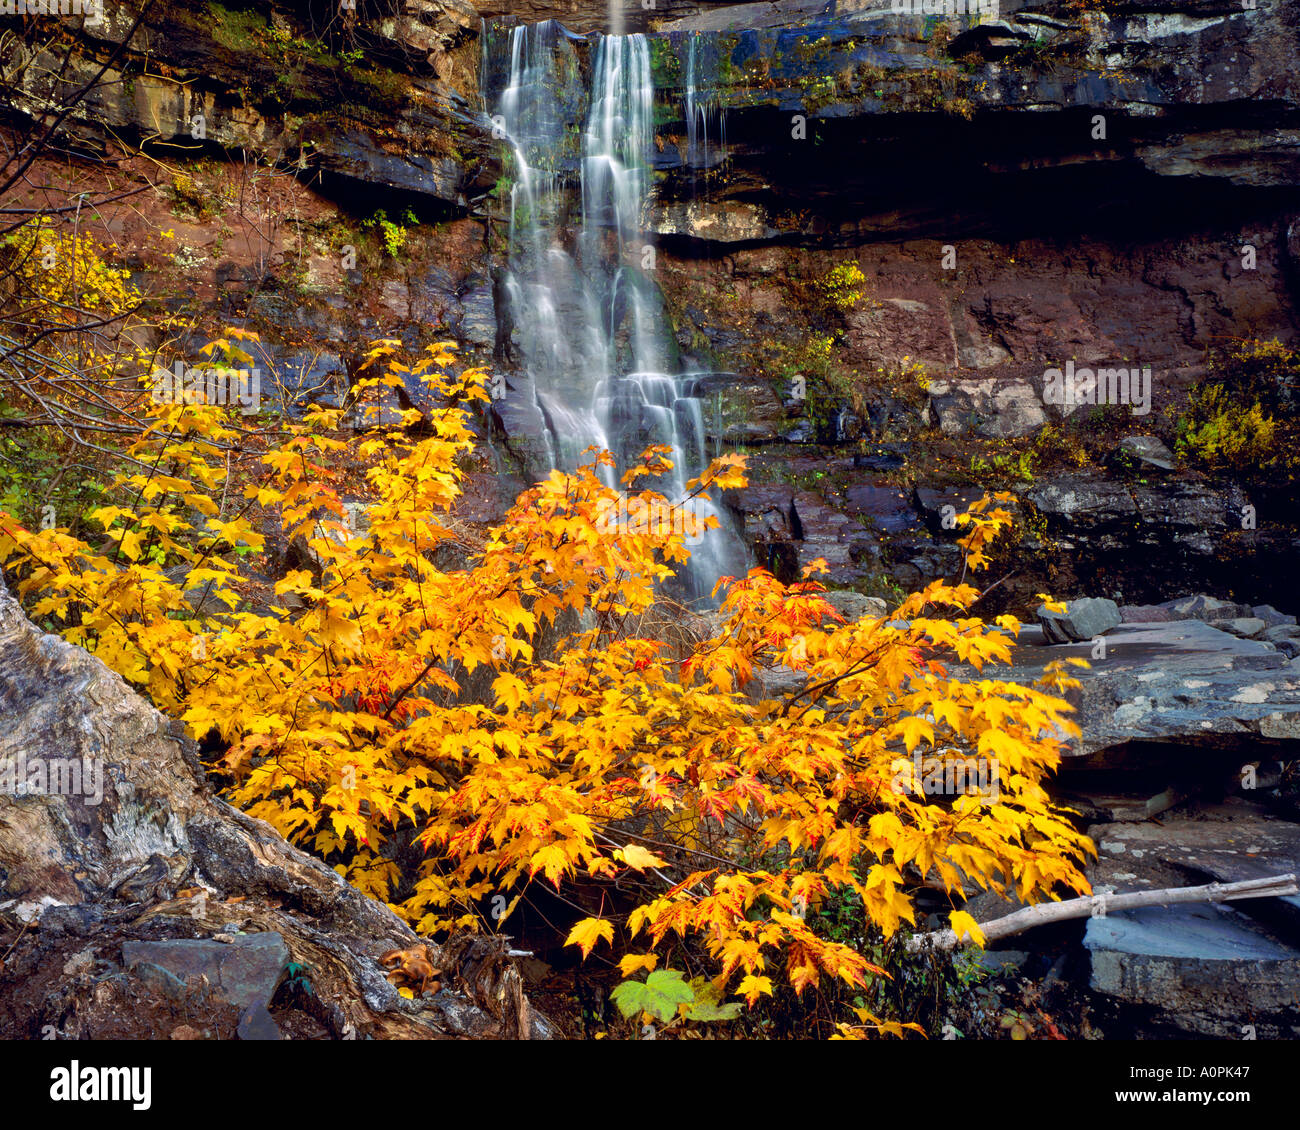 Autunno a Kaaterskill Falls Catskill Forest Preserve Catskill Mountains New York Foto Stock